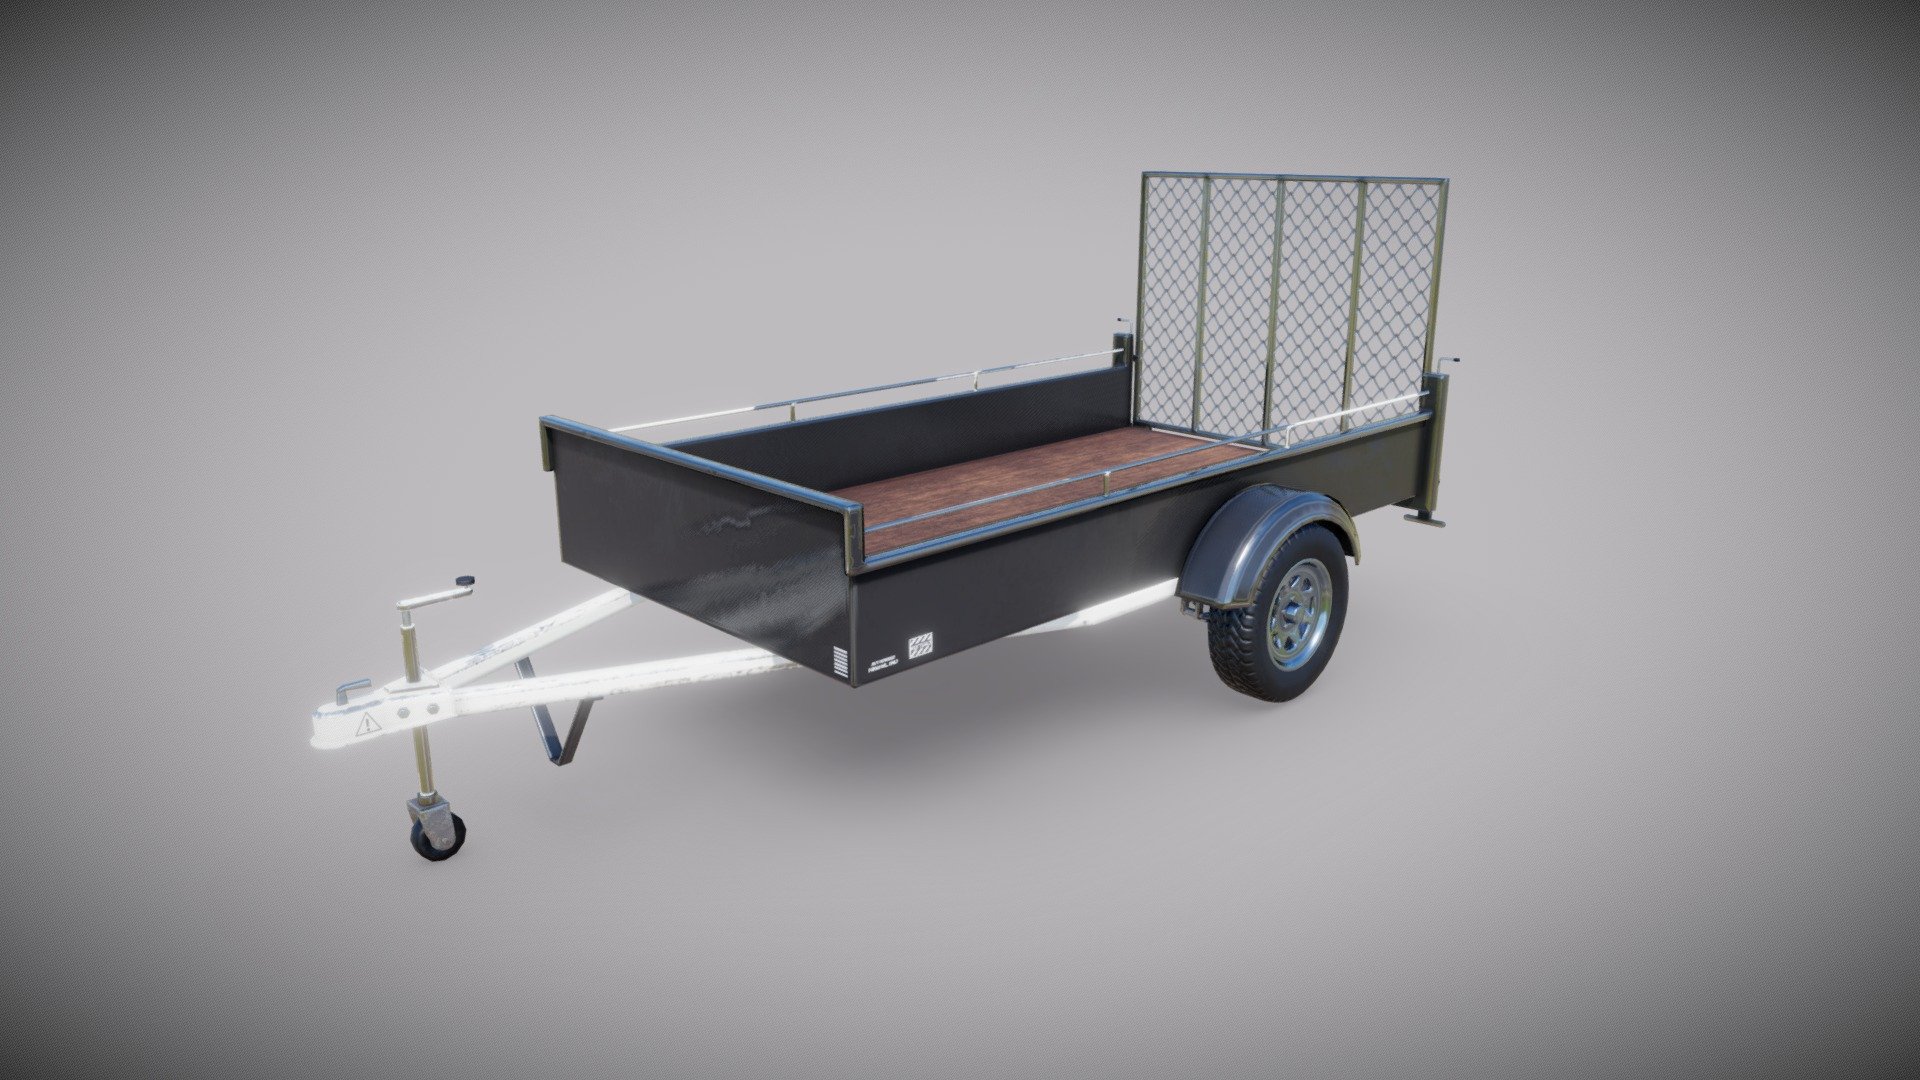 Small two wheel car  trailer. 
Model and baking made in Blender.
Textured in Substance Painter 3d model